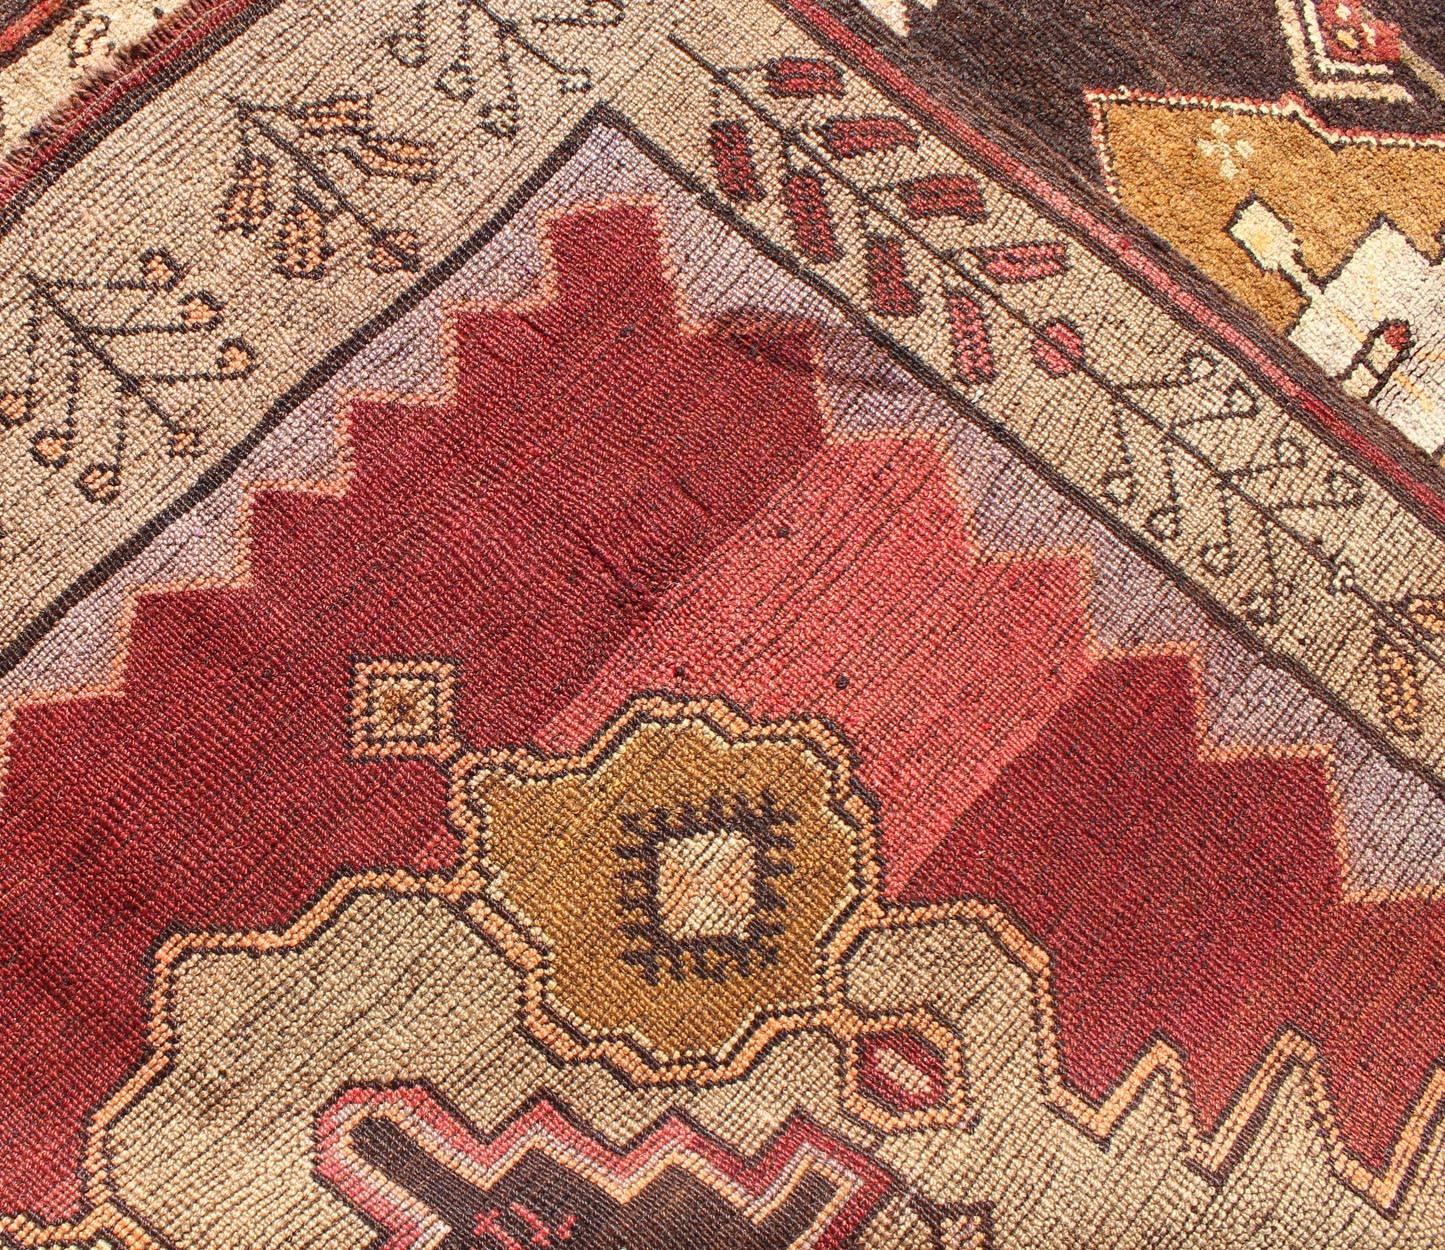 Wool Tribal Turkish Rug from Turkey with Colorful Dual Central Medallion Design For Sale